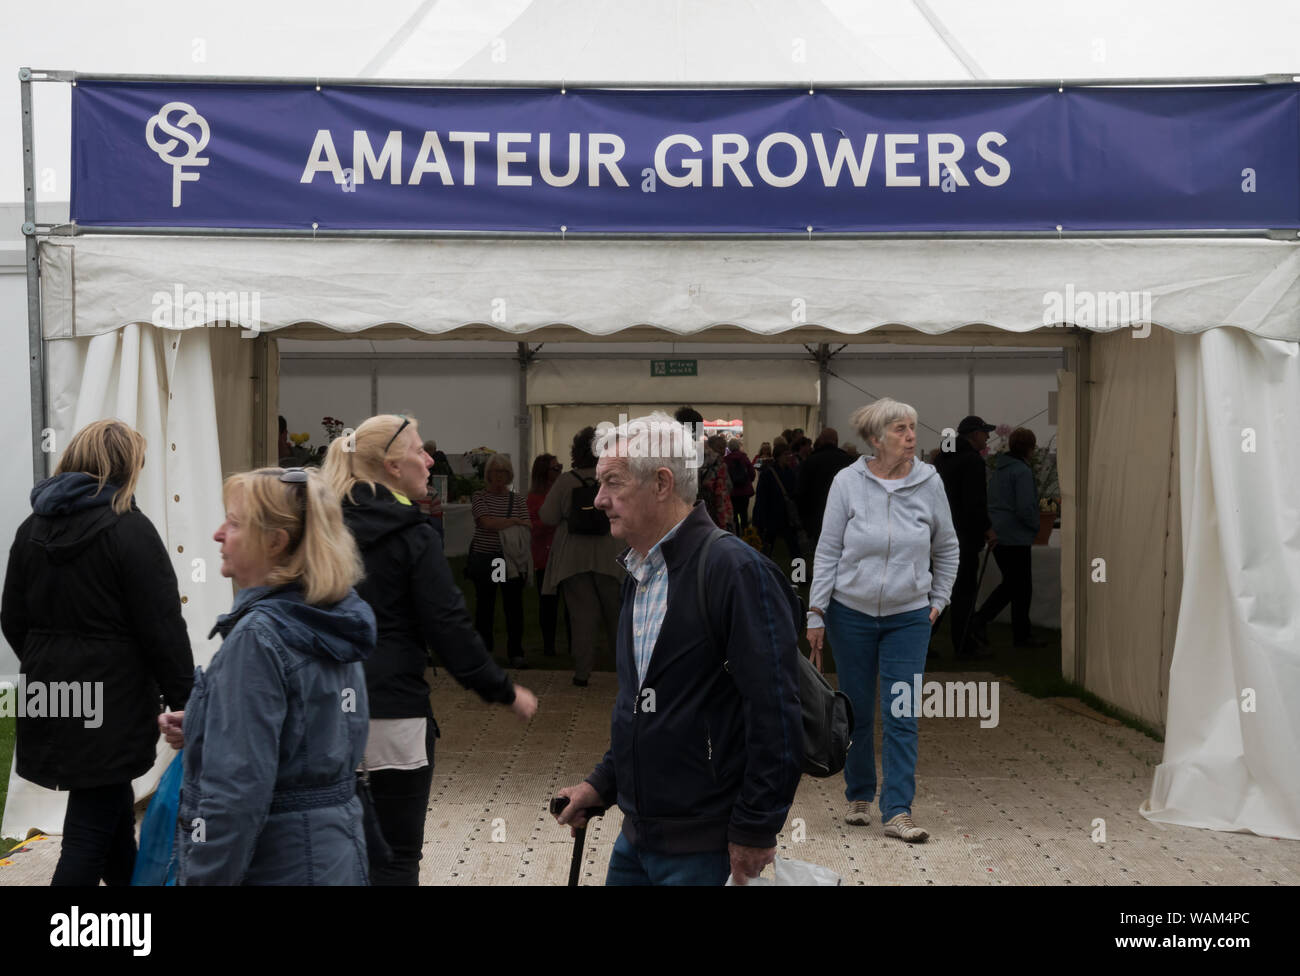 People entering and leaving the Amateur Growers marque at the 2019 Southport Flower Show. Stock Photo